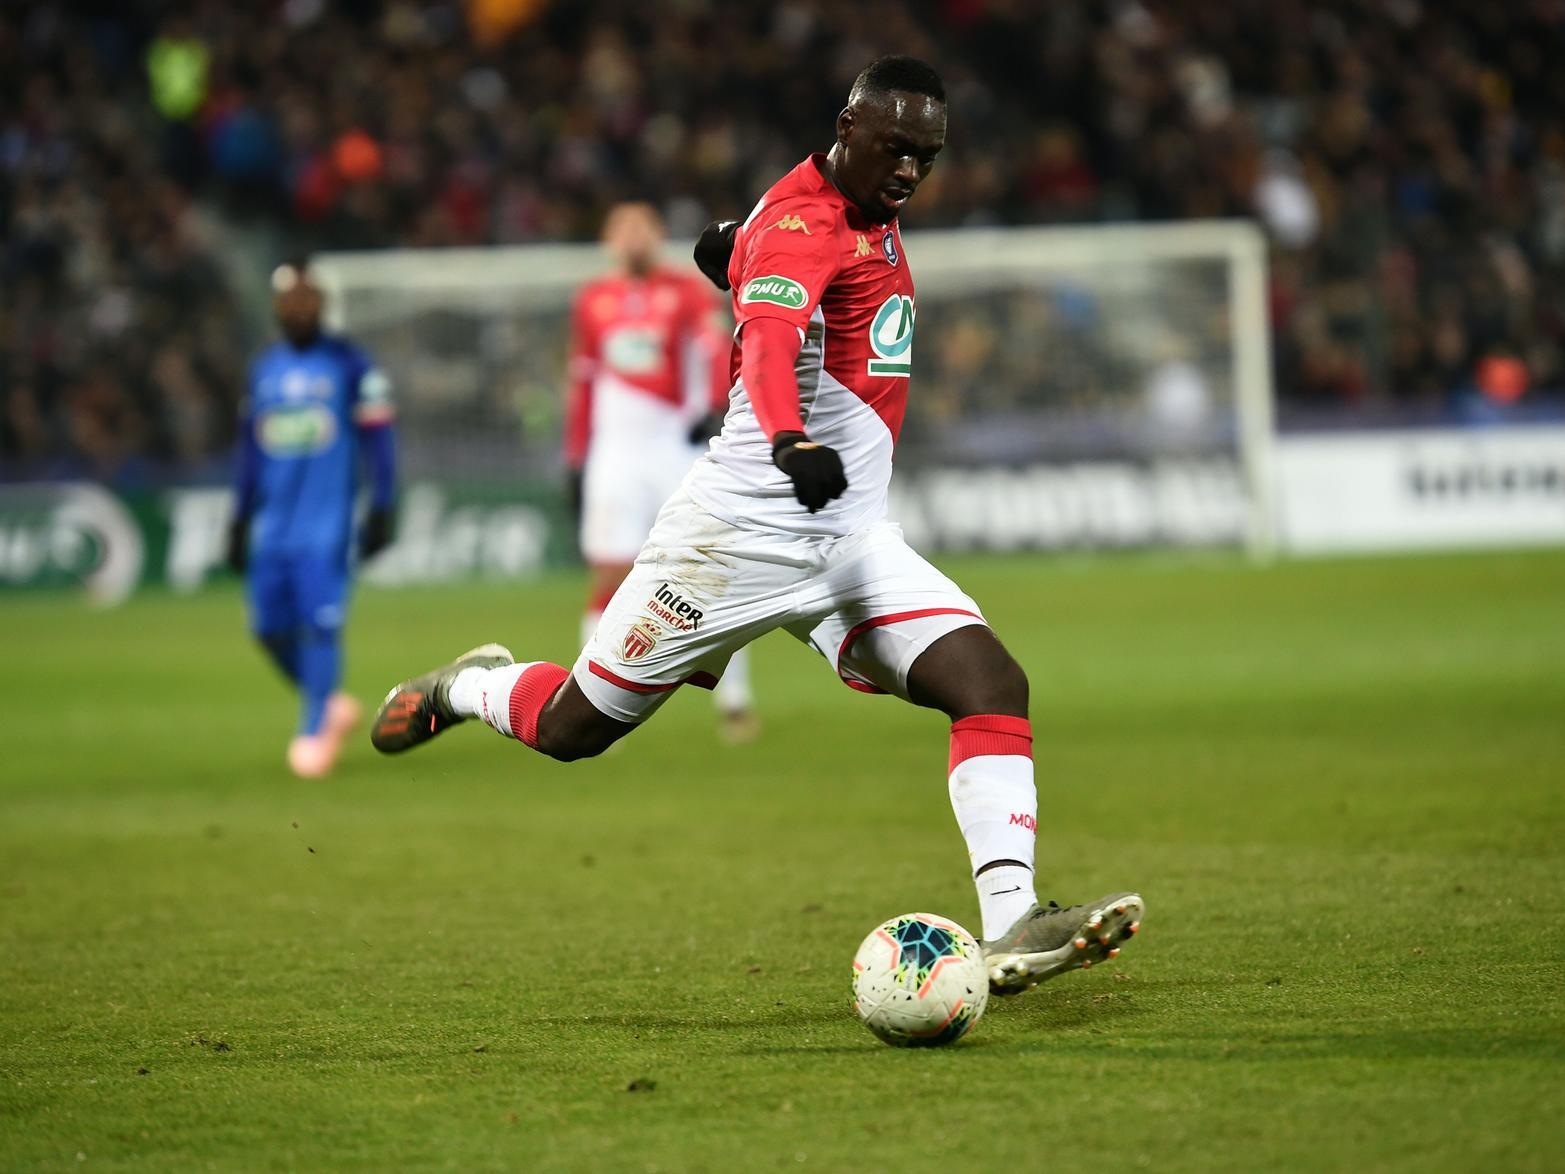 Leeds United have been linked with a move RB Leipzig's 13m striker Jean-Kevin Augustin, who has currently on loan with Monaco and has been capped at U21 level for France. (The Athletic)